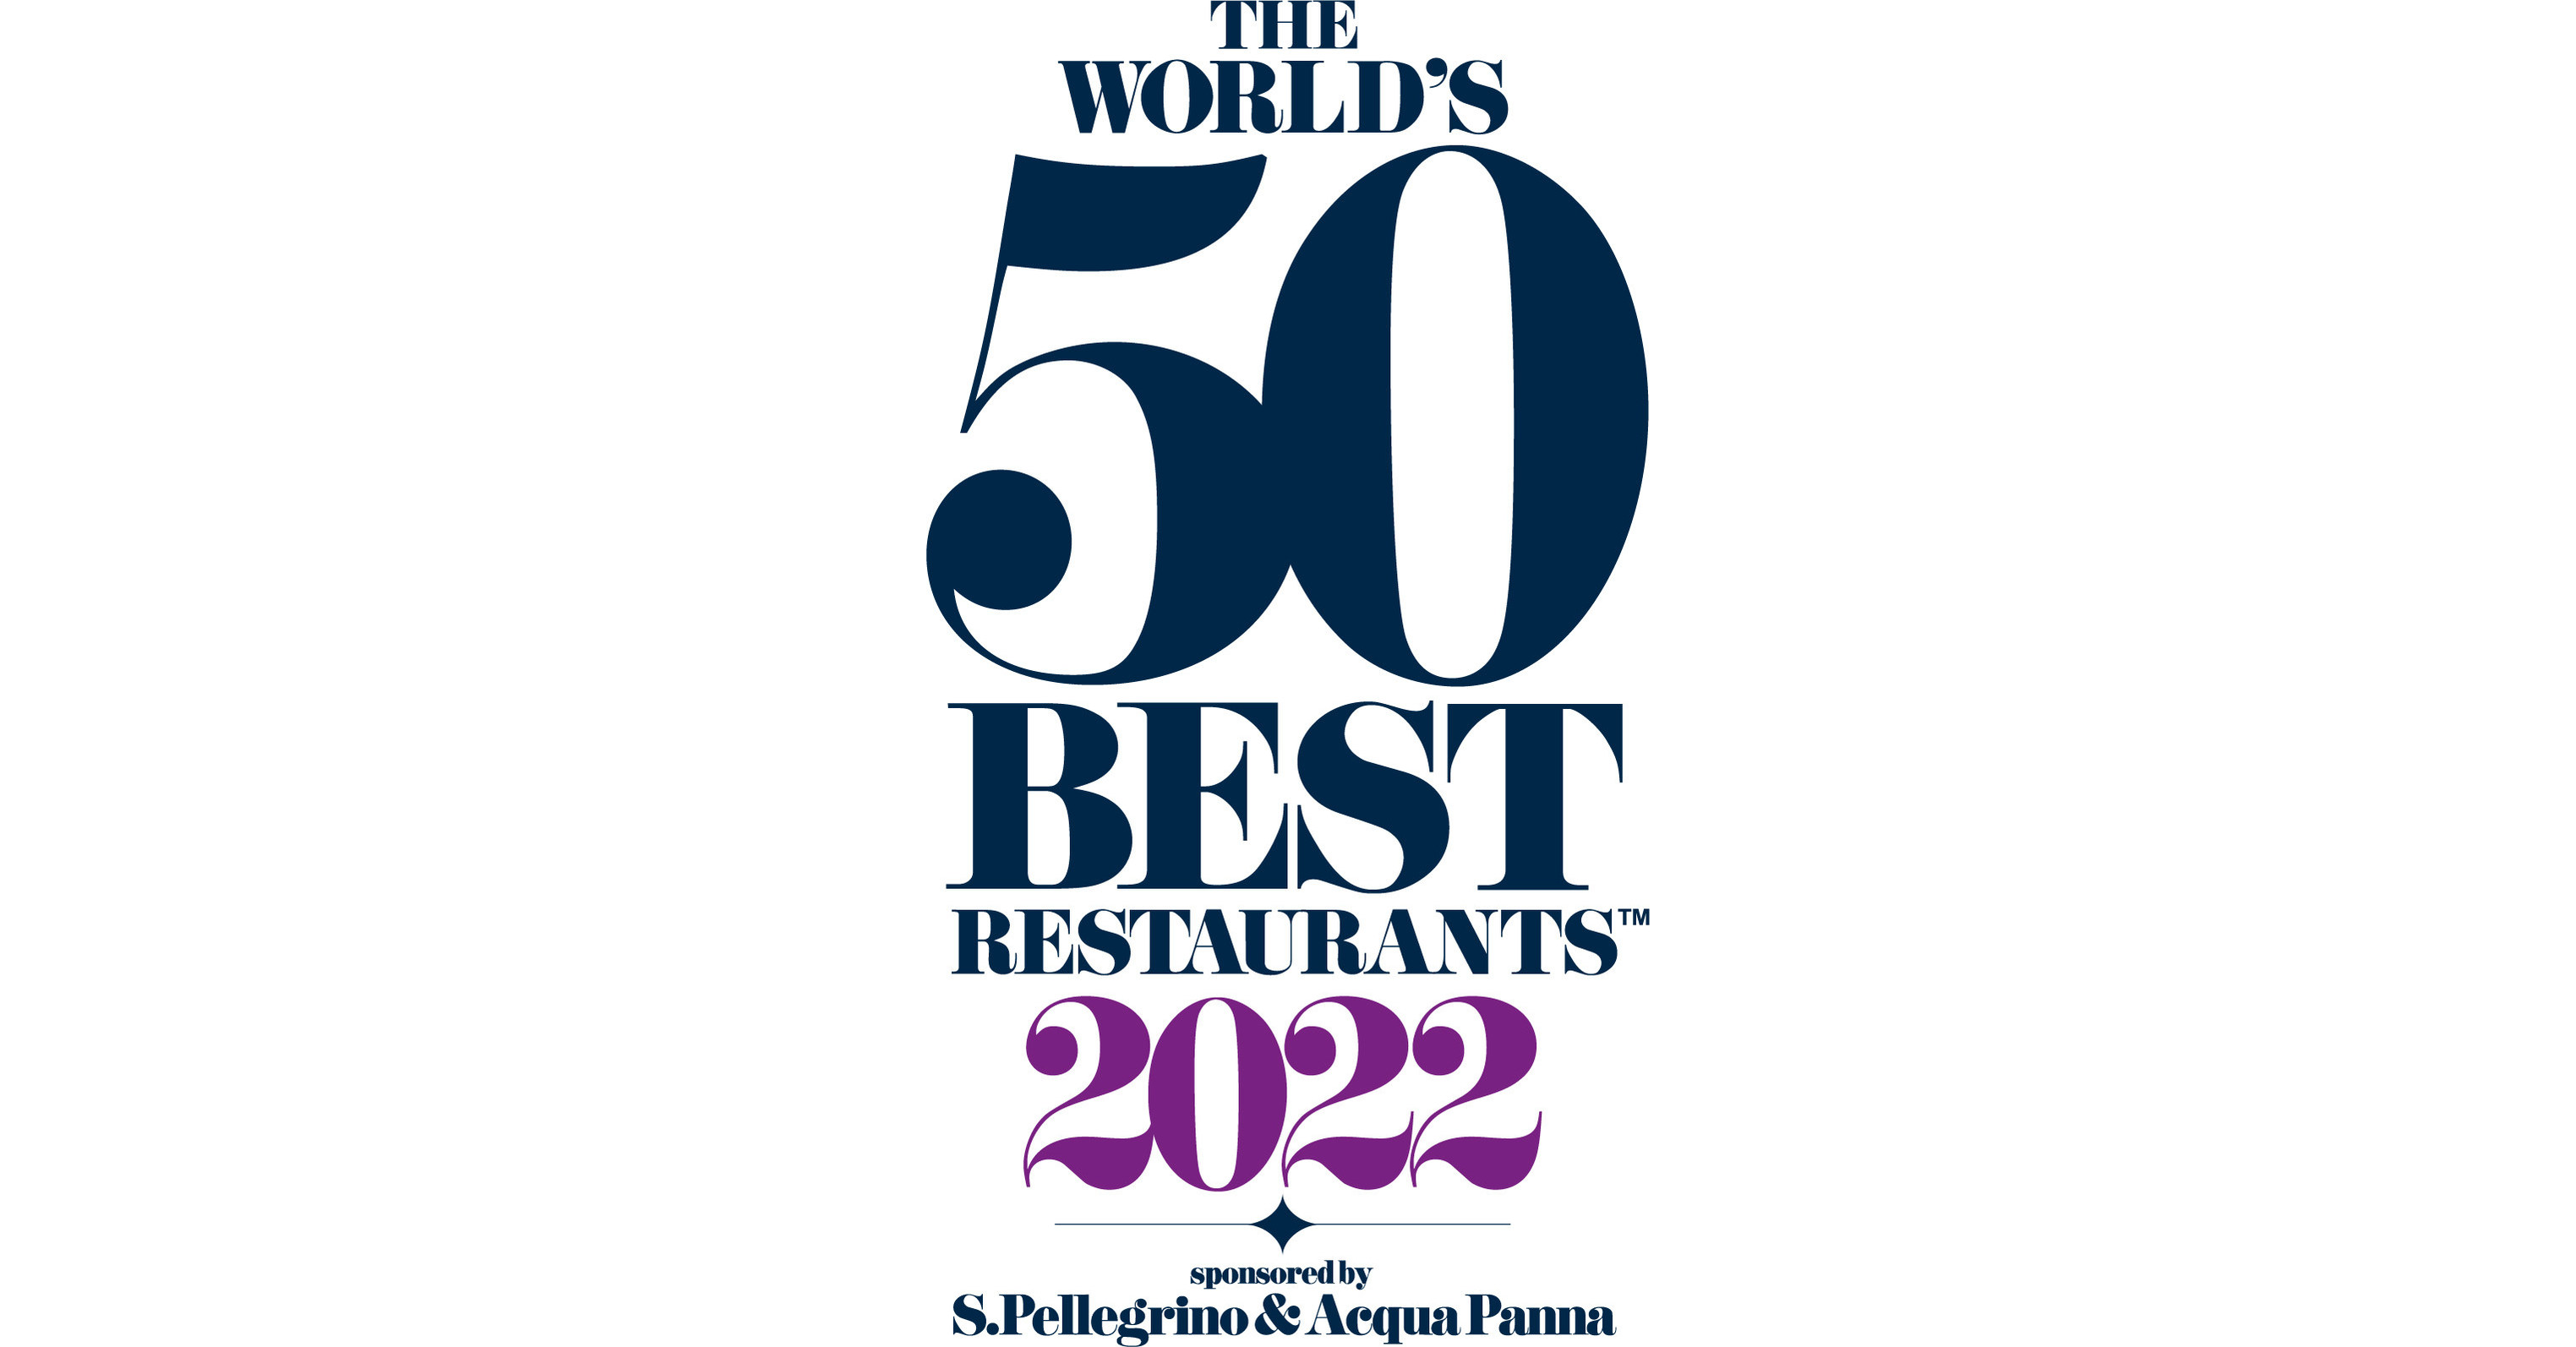 THE WORLD'S 50 BEST RESTAURANTS UNVEILS THE 51100 LIST FOR 2022